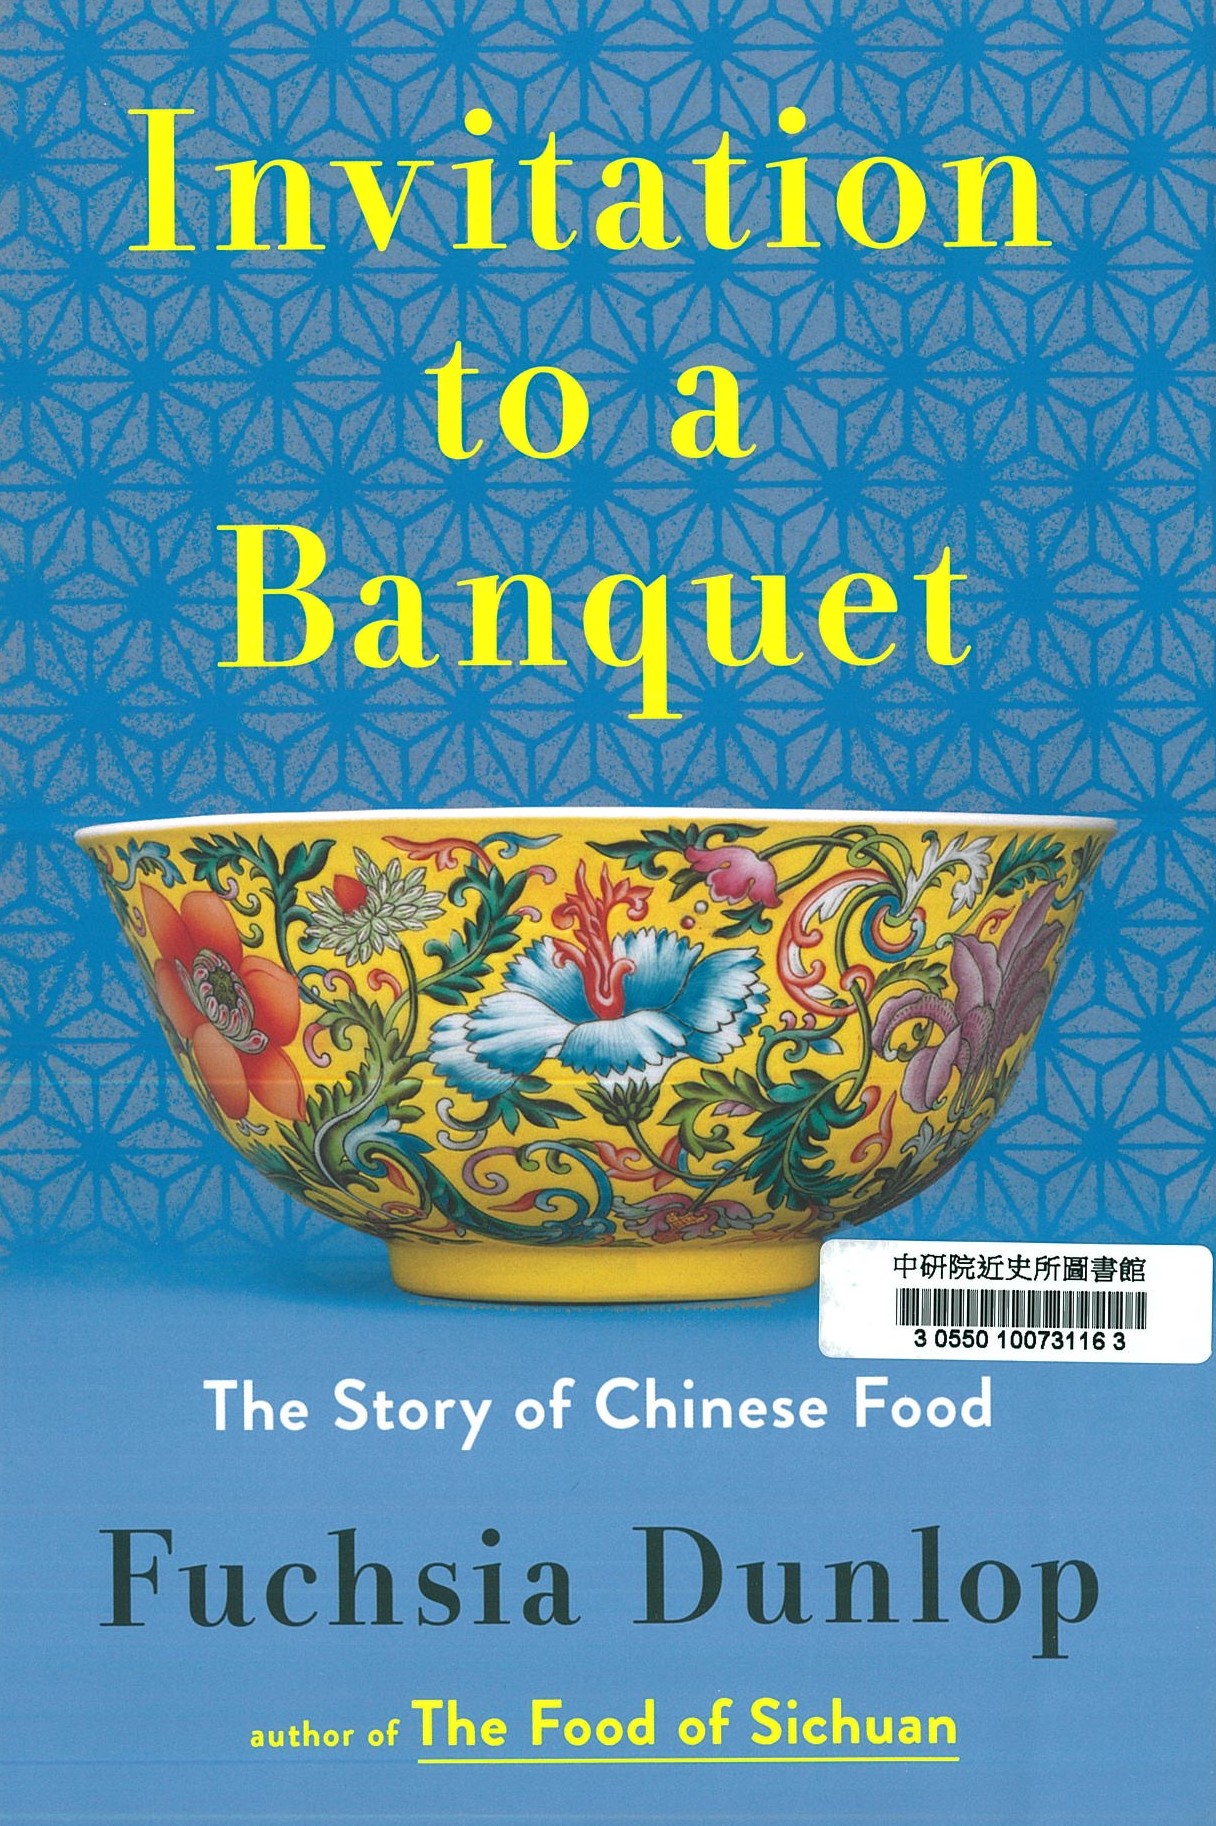 Invitation to a banquet : the story of Chinese food 